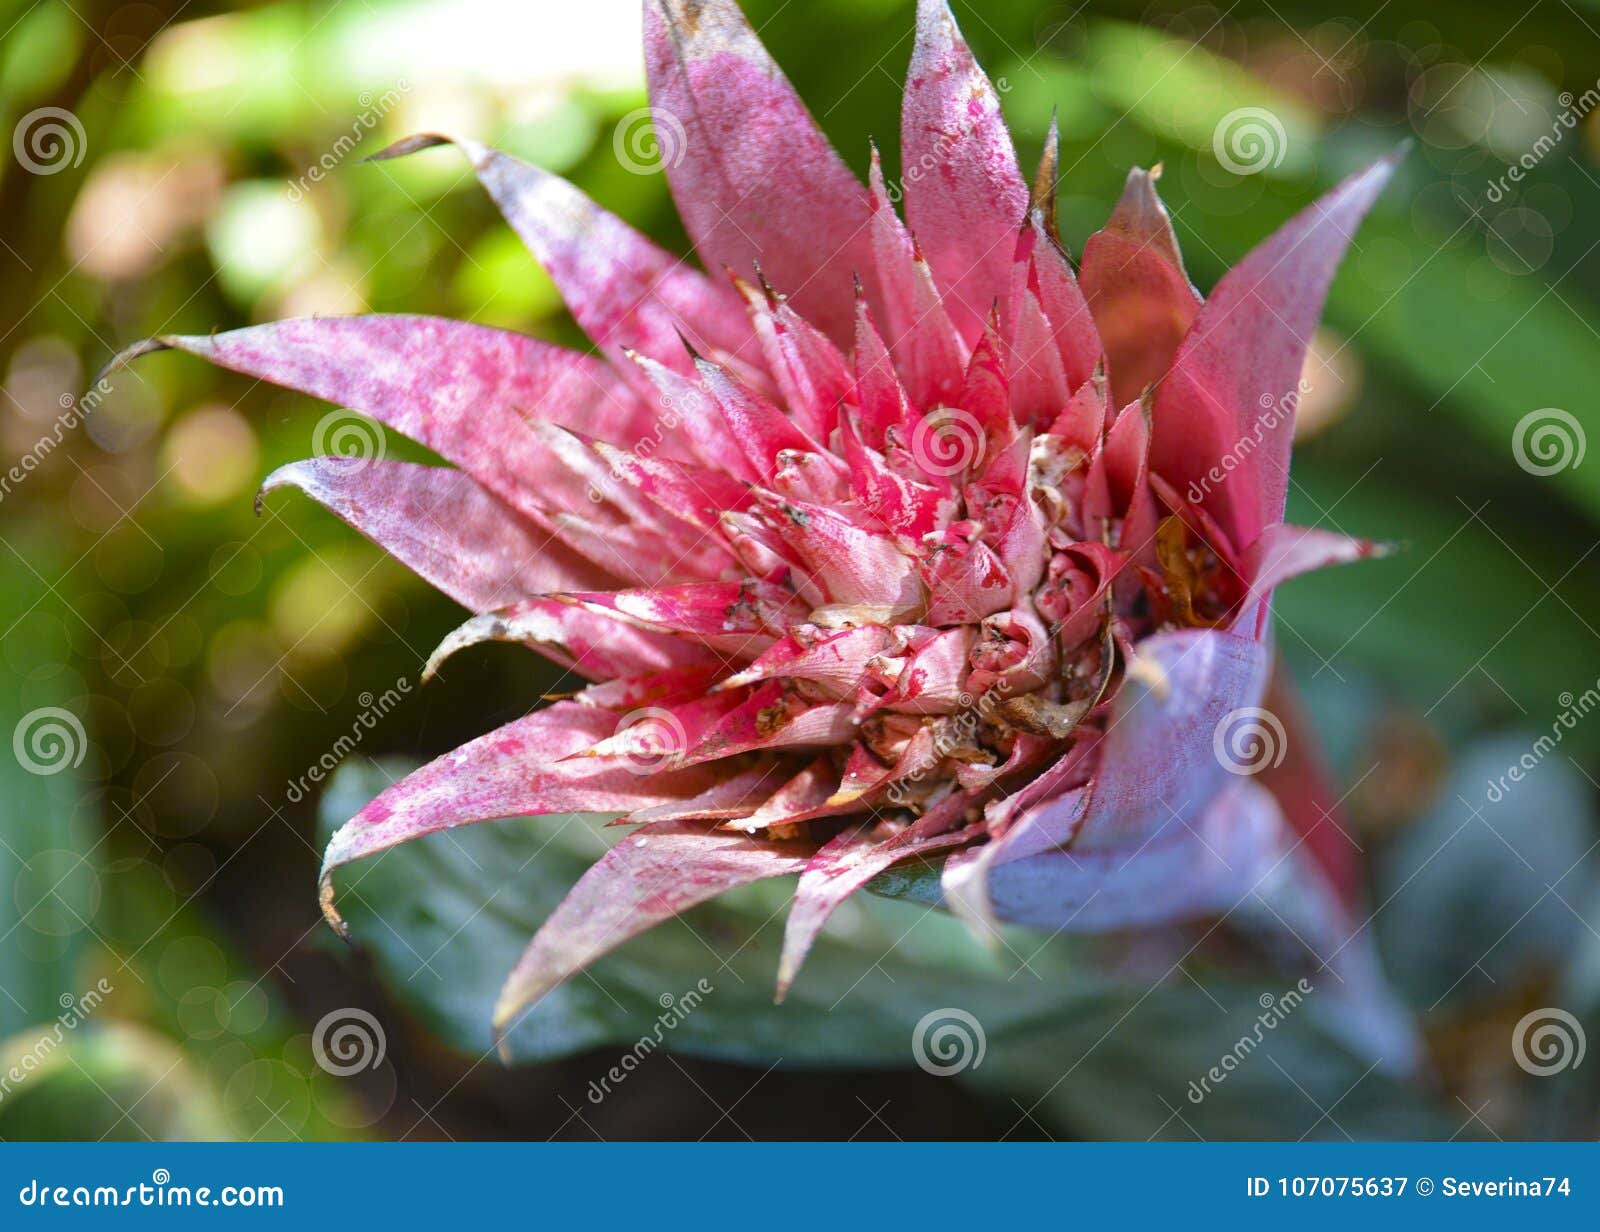 Pink Aechmea Fasciata Flower In A Tropical Garden Silver Vase Or Urn Plant Of Bromeliad Family Stock Image Image Of Bloom Detail 107075637